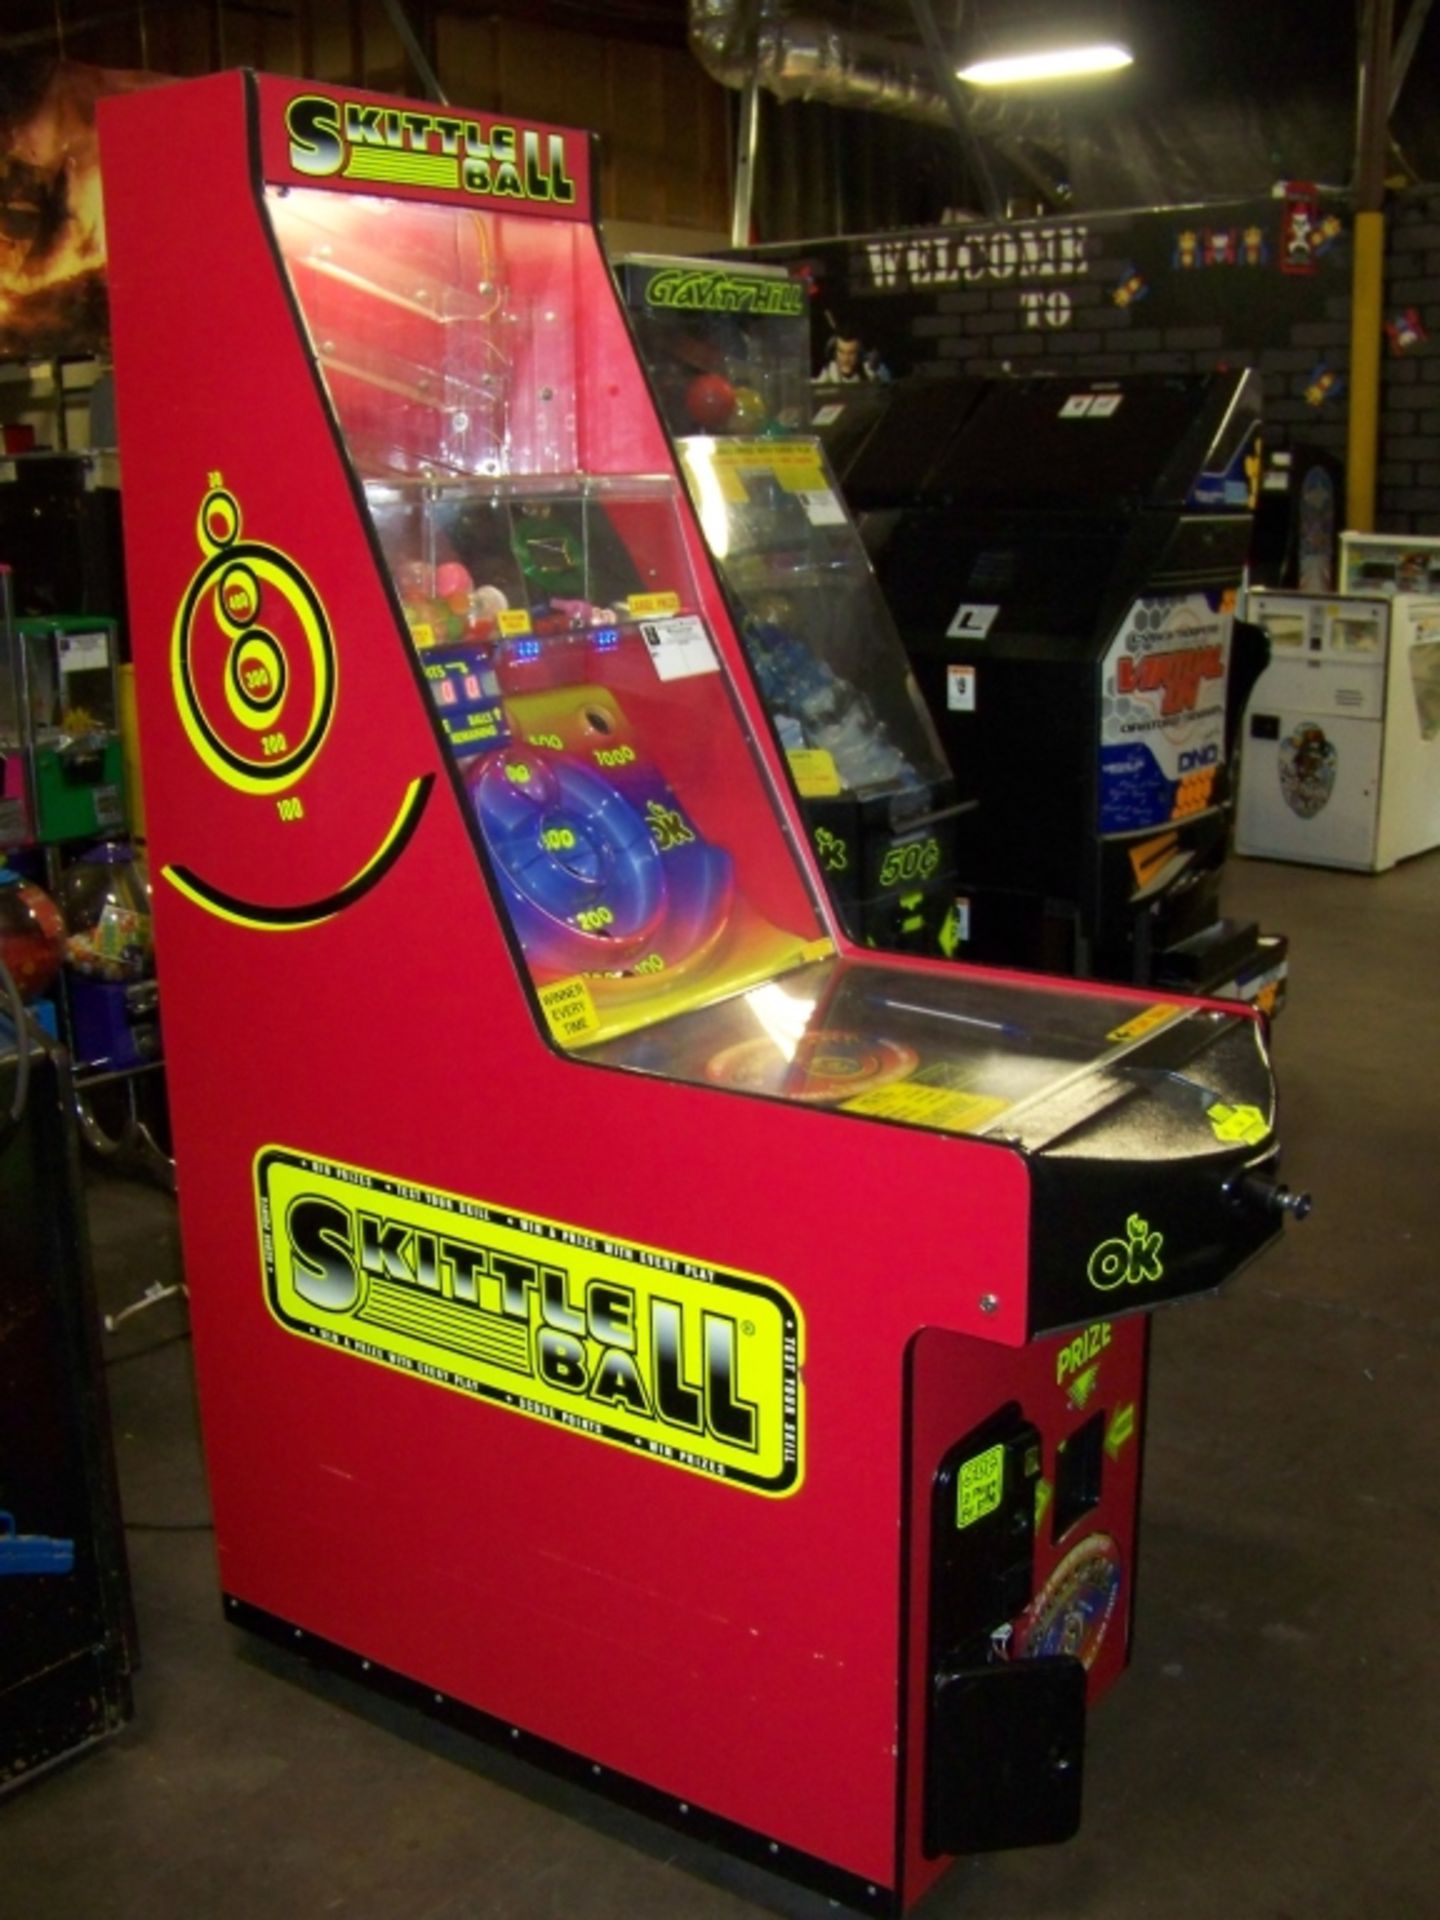 SKITTLEBALL INSTANT PRIZE REDEMPTION GAME RED Item is in used condition. Evidence of wear and